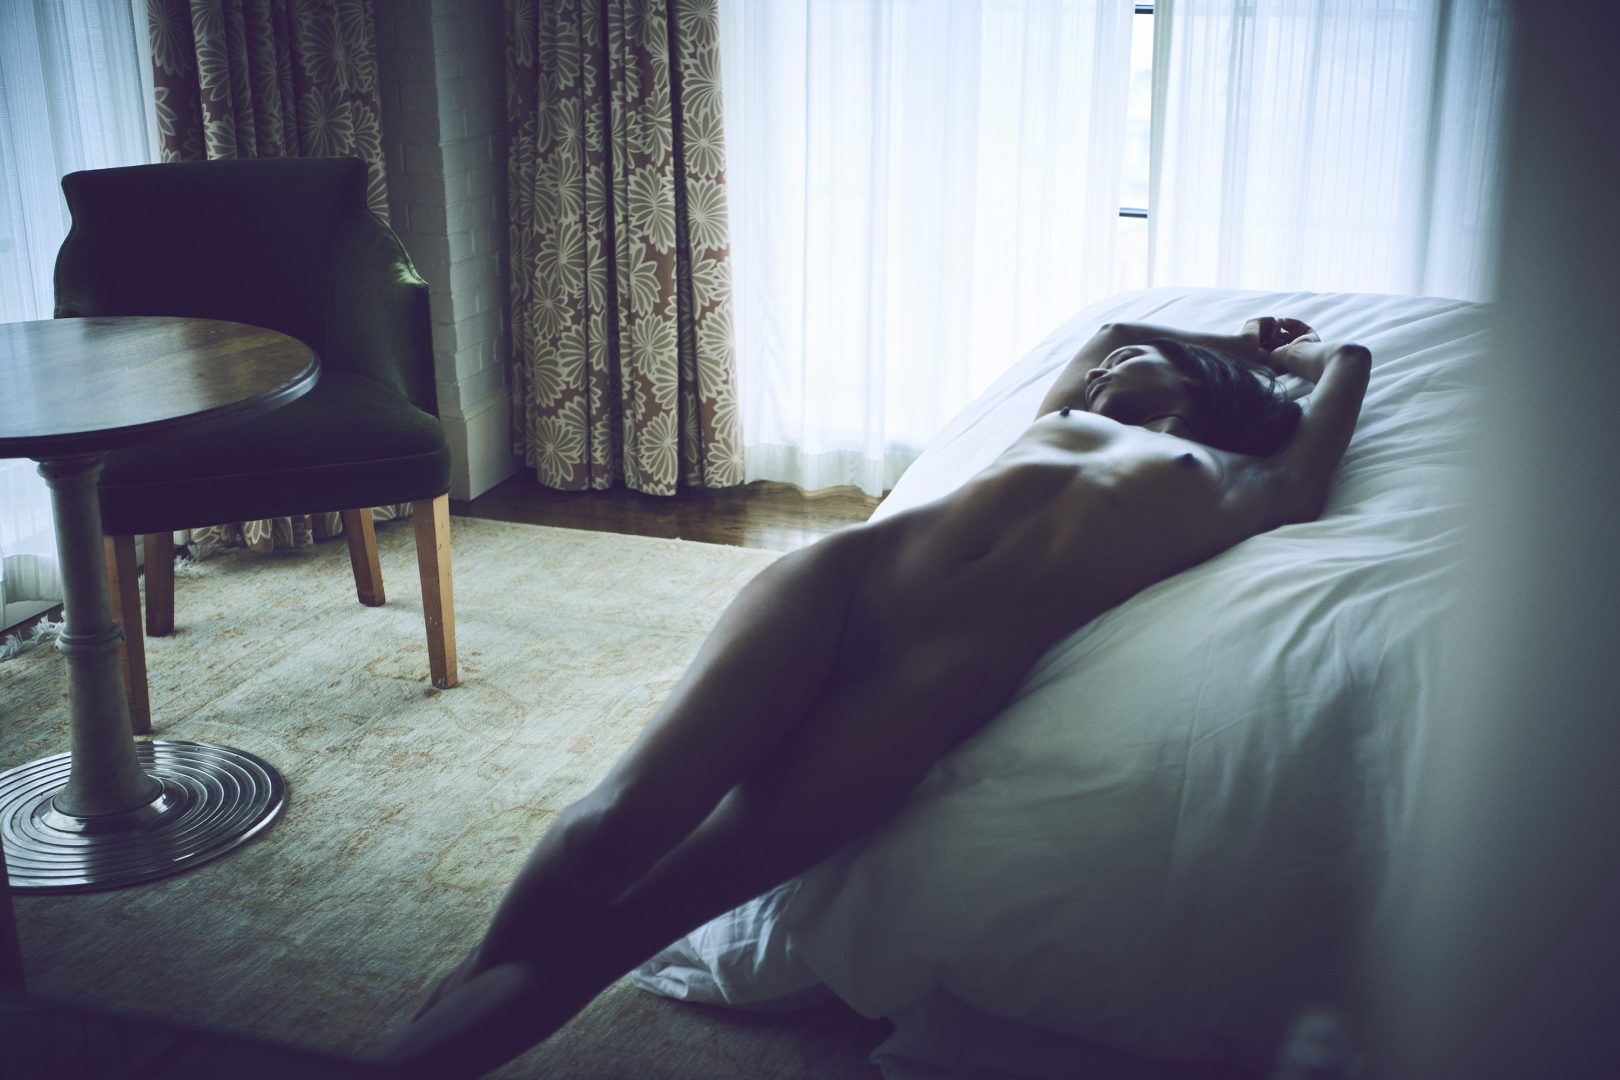 Naked black girl lying on bed in hotel room by Stefan Rappo